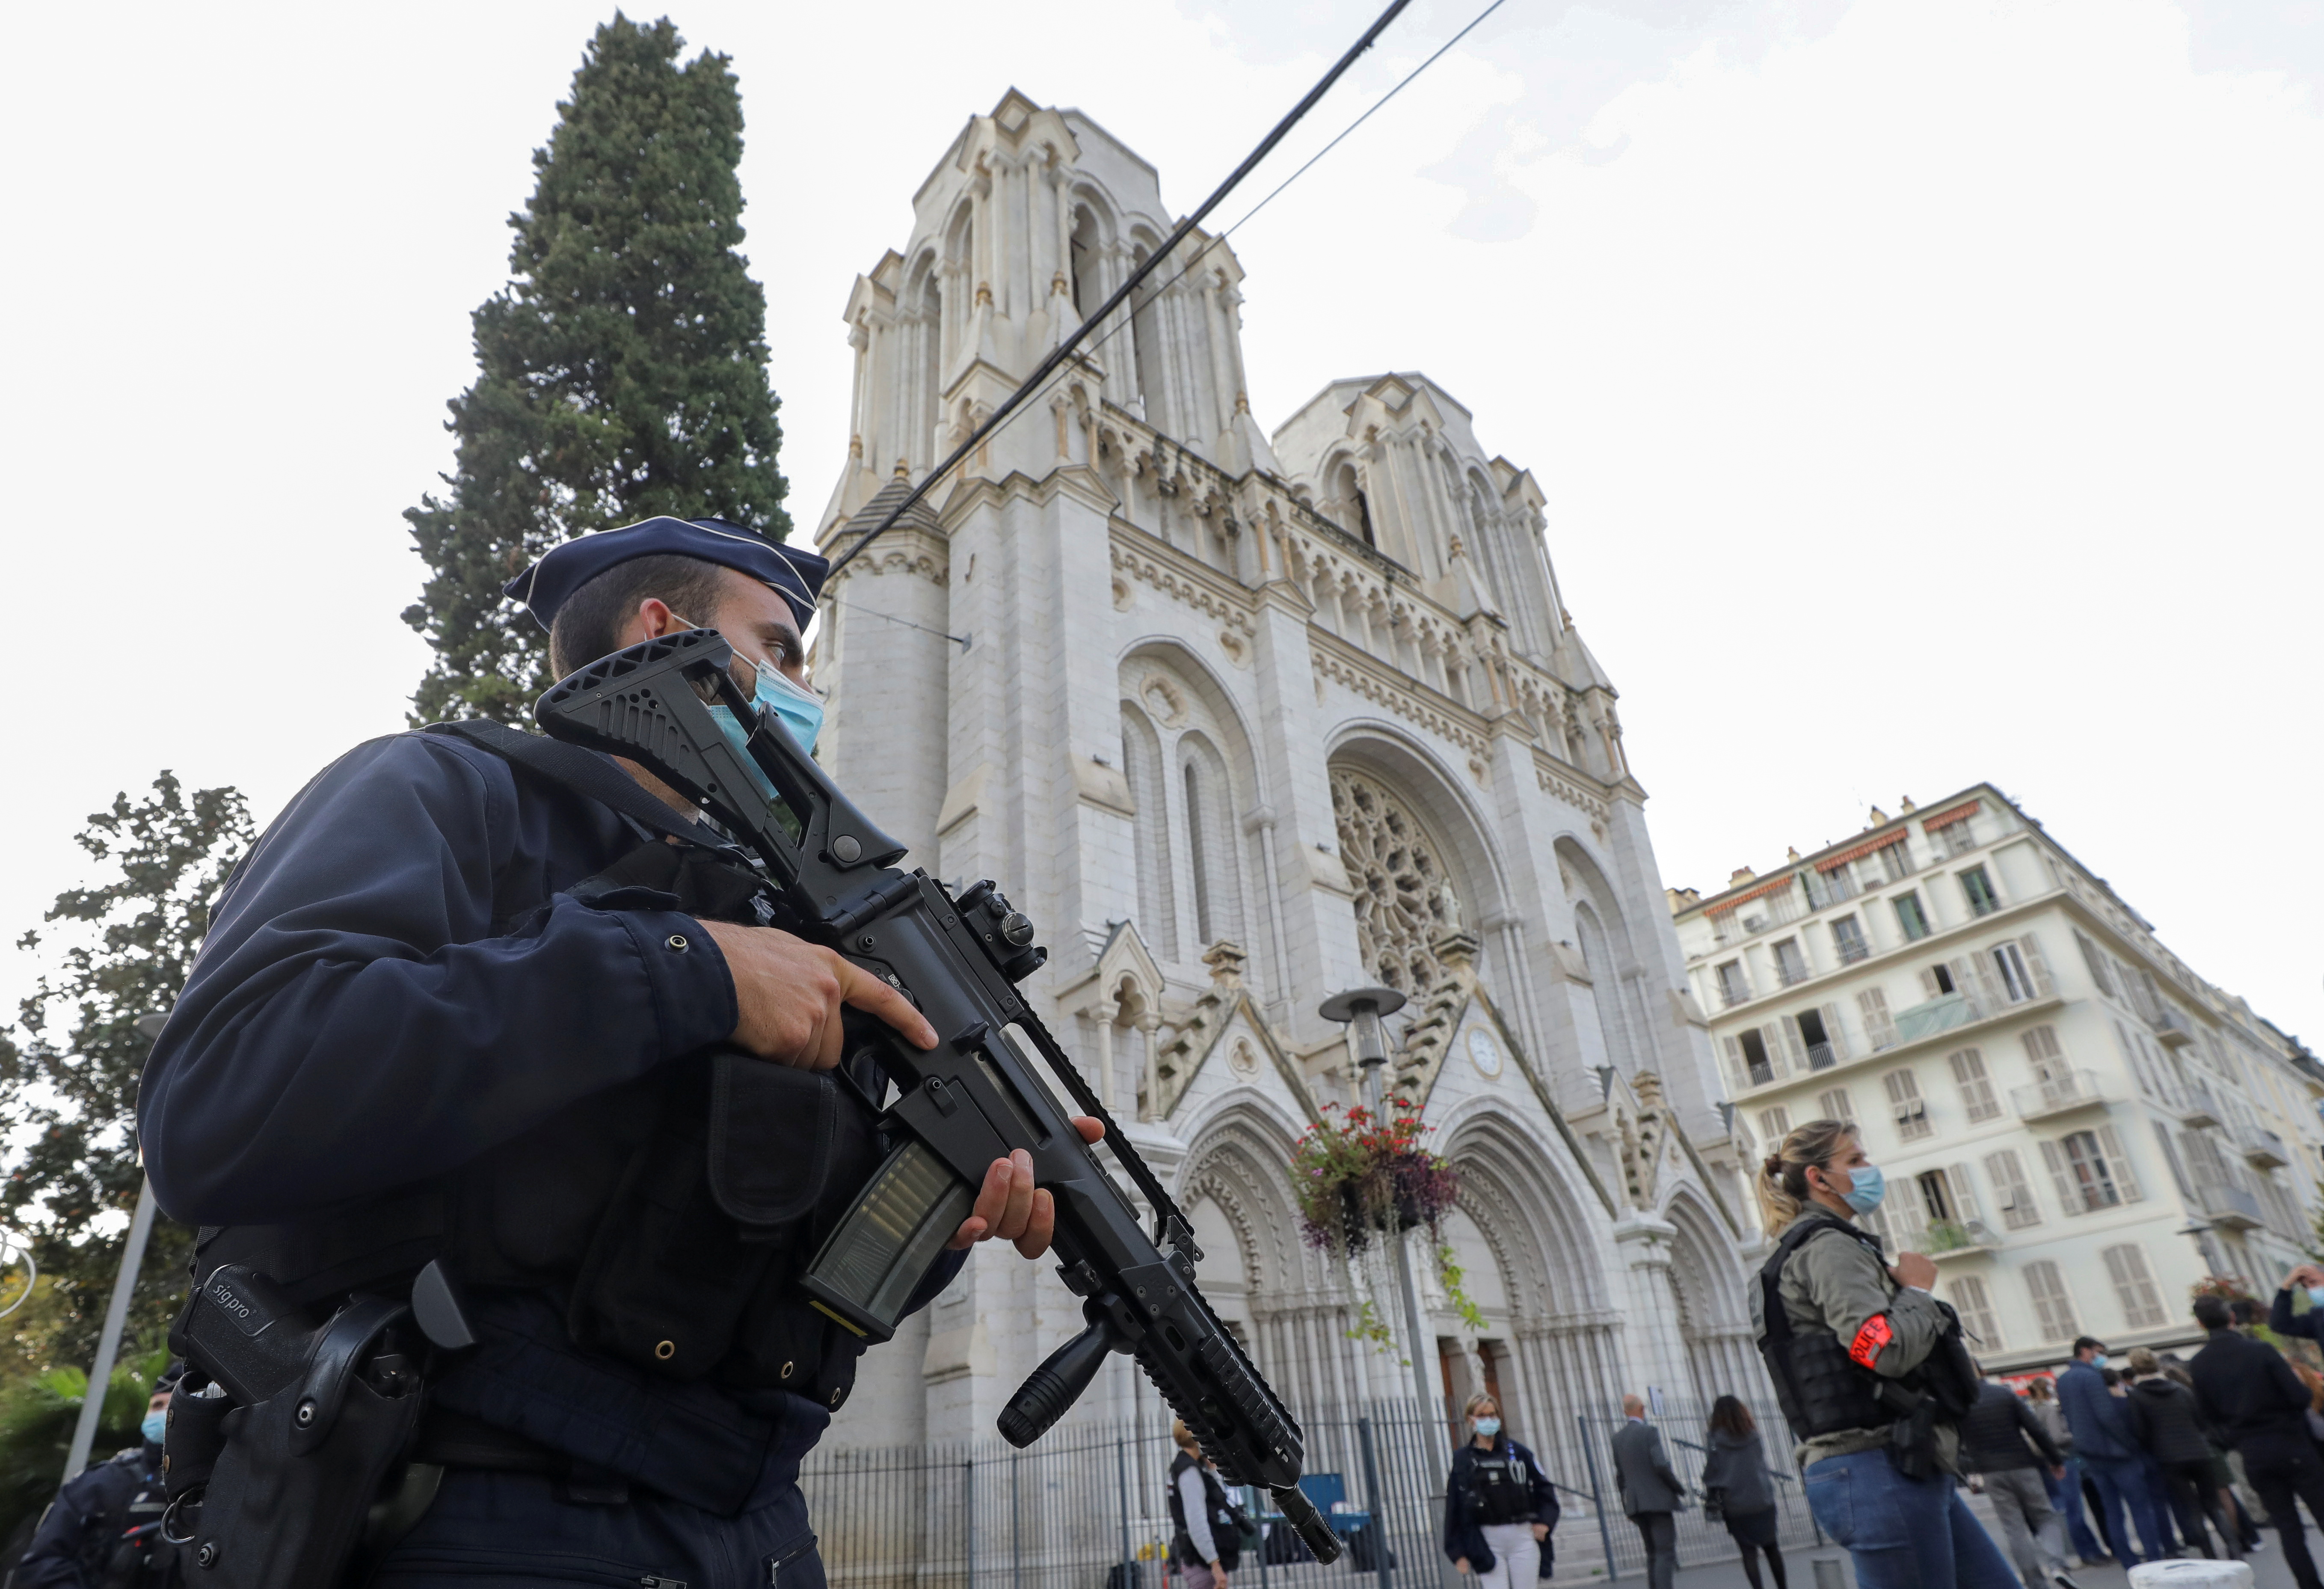 A police officer stands near Notre Dame church, where a knife attack took place, in Nice, France October 29, 2020. REUTERS/Eric Gaillard/Pool